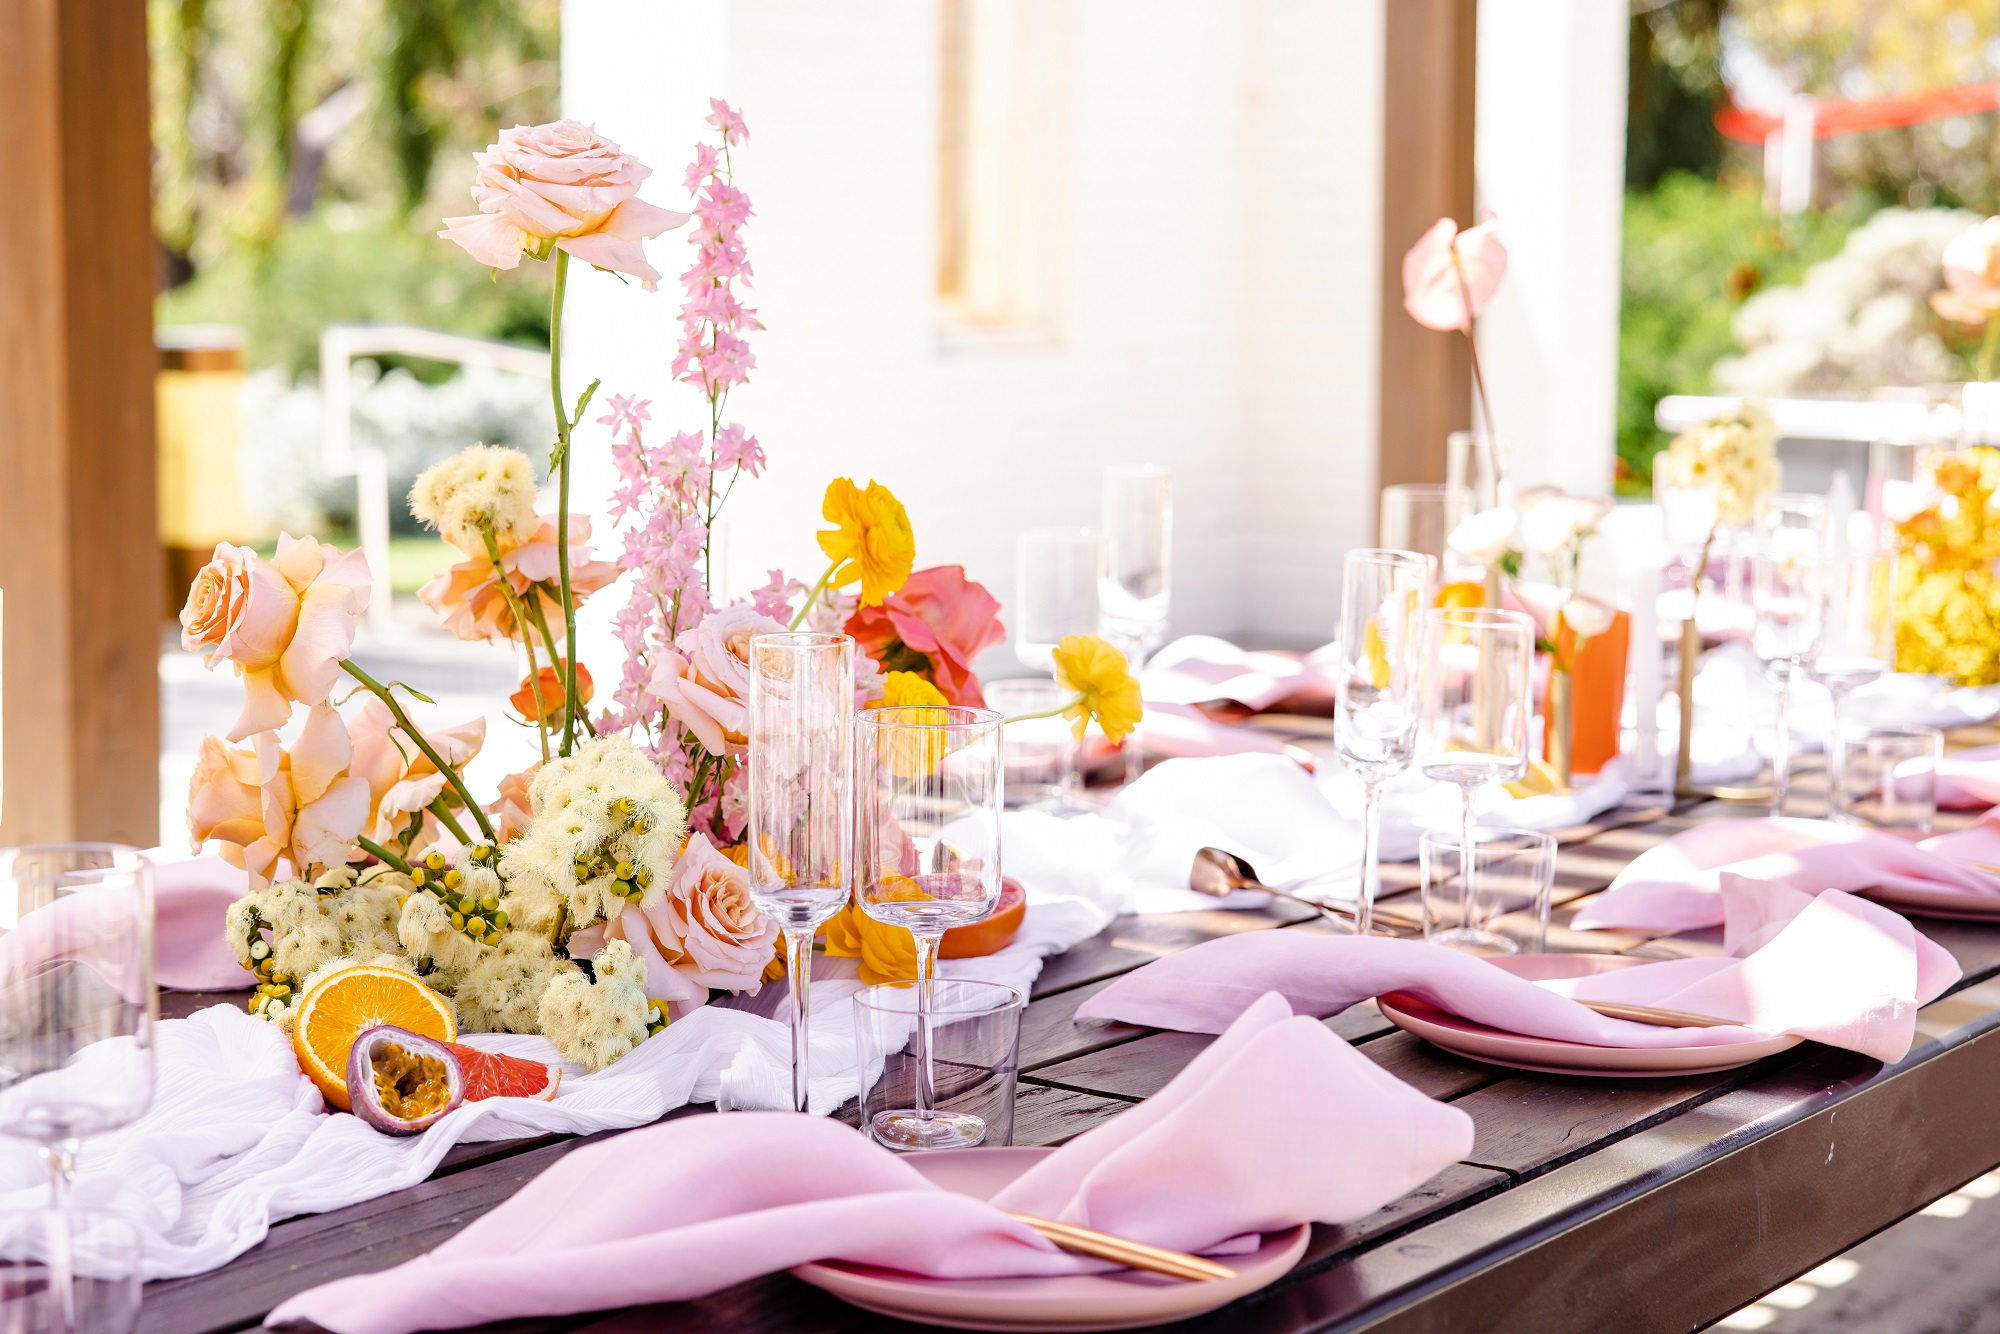 Wedding styling trends to watch in 2023, bright citrus wedding styling